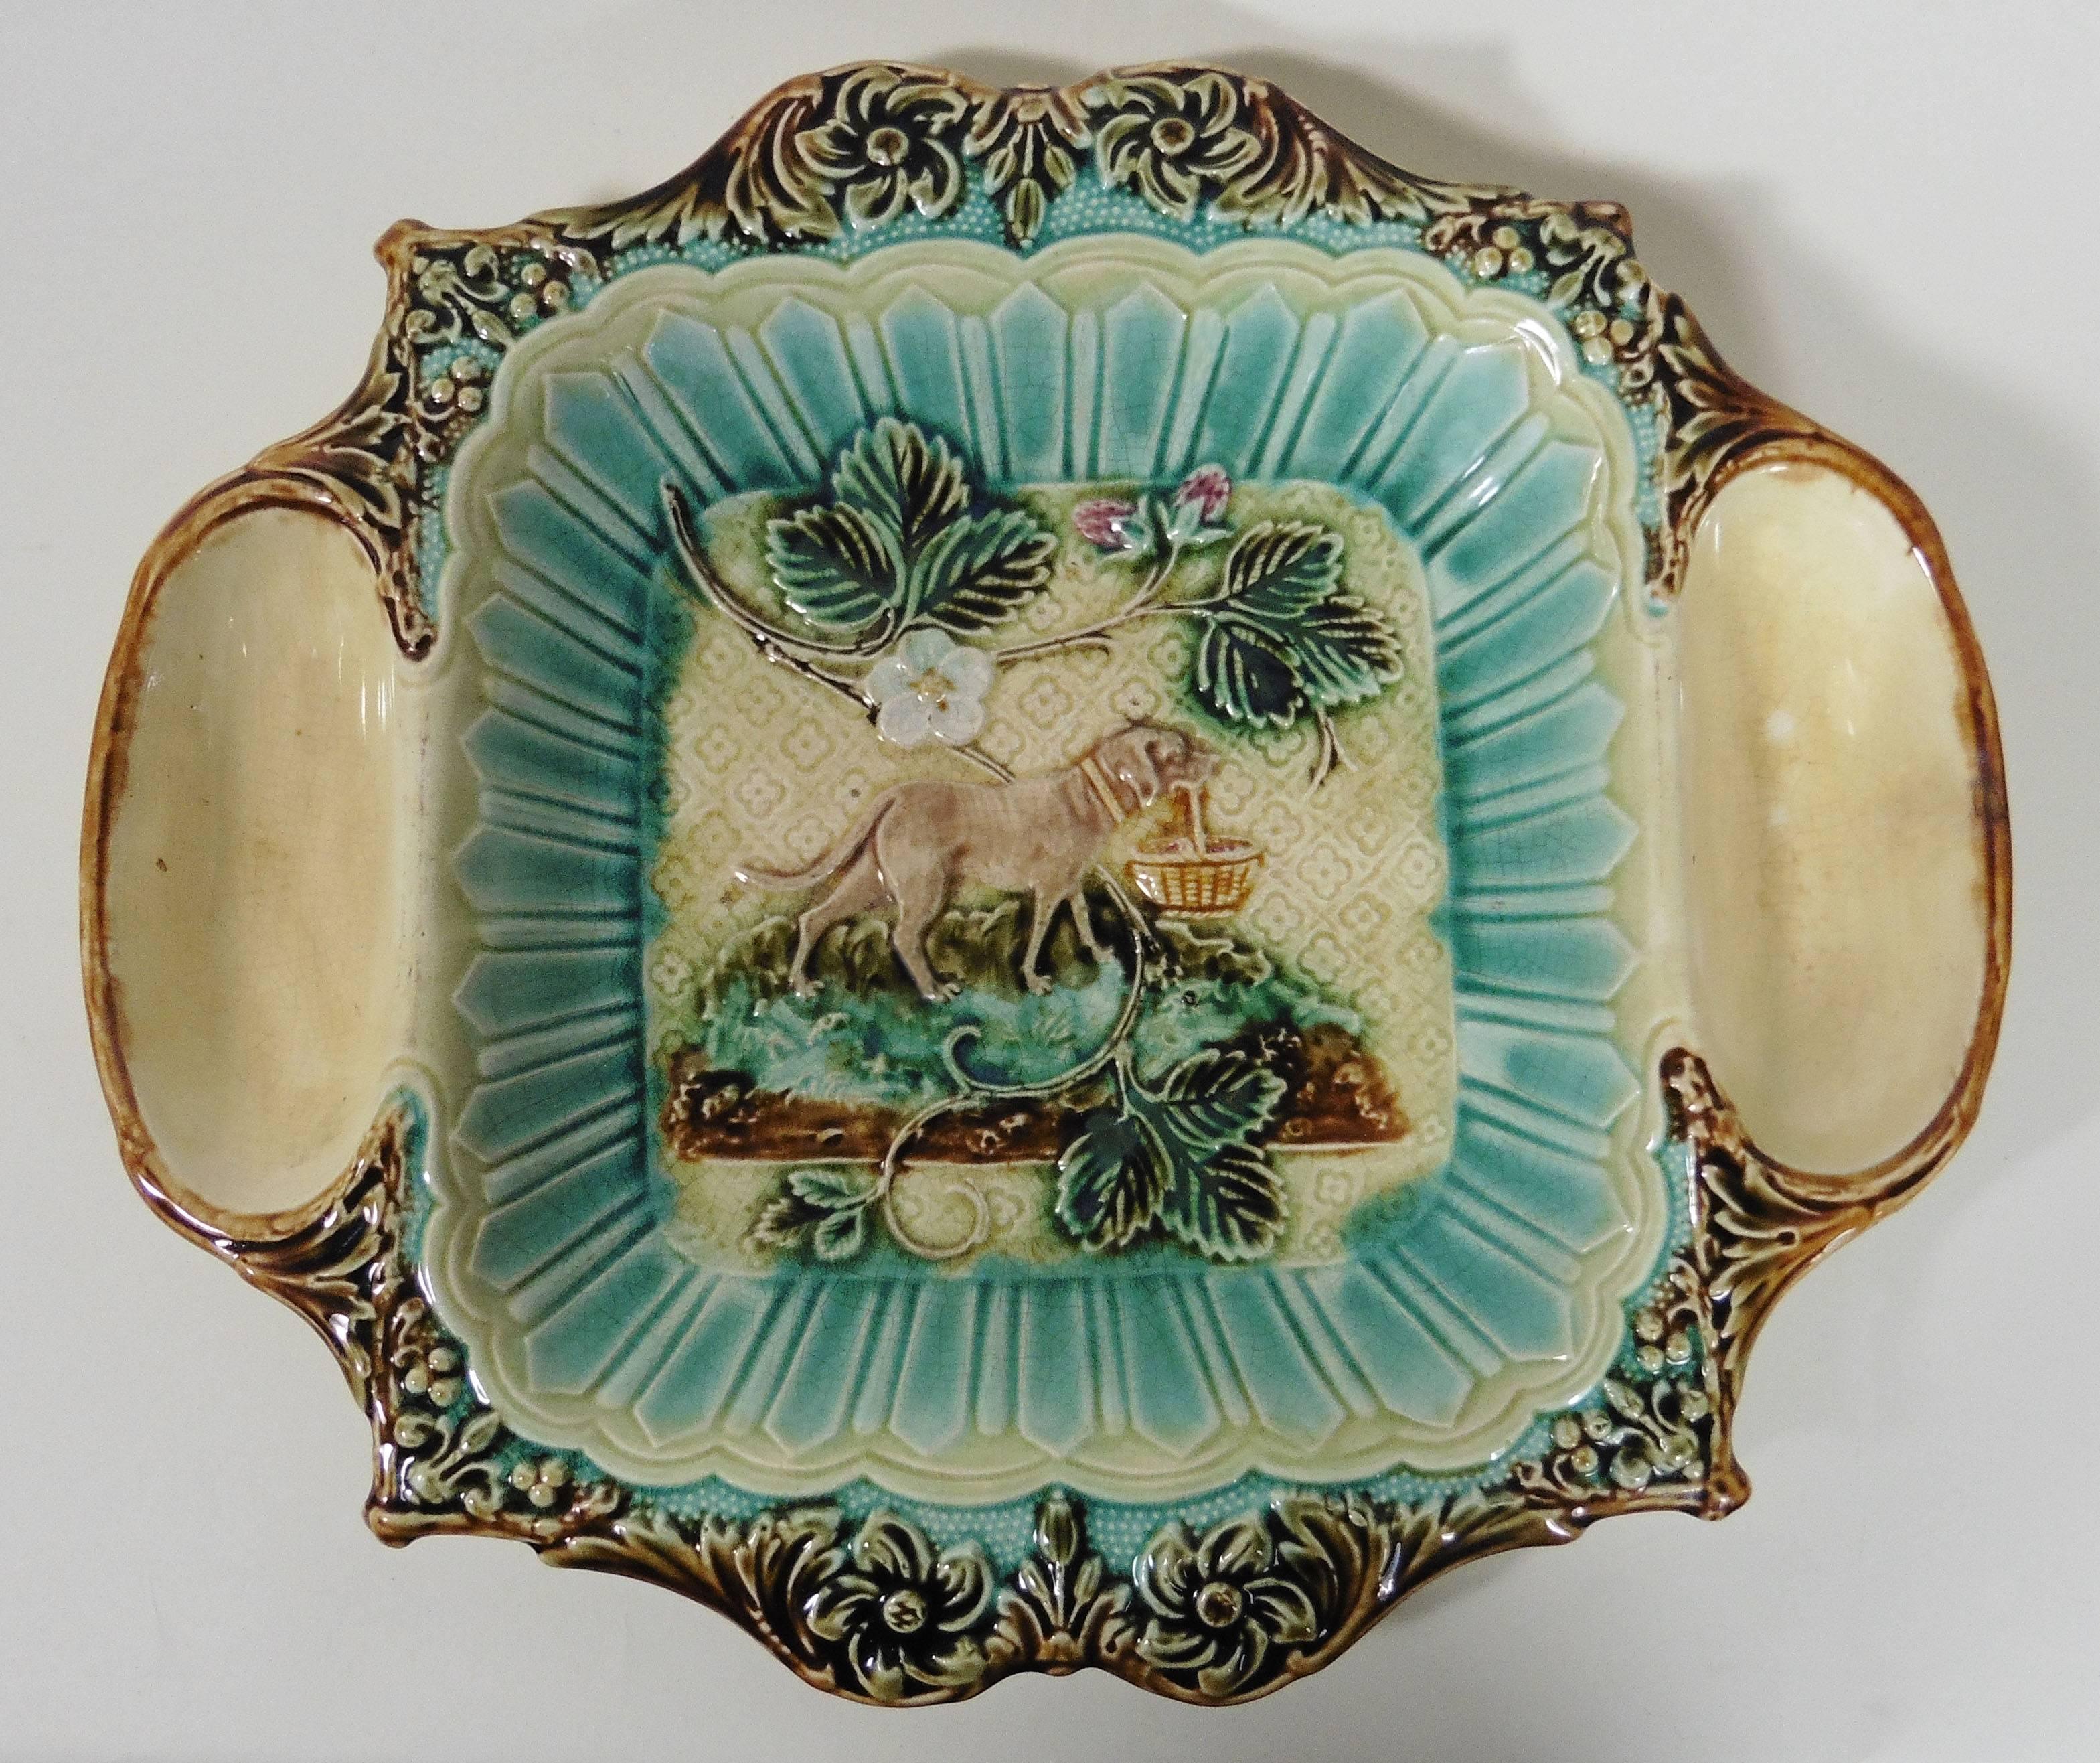 Unusual French Majolica strawberry server with cream and sugar spaces, circa 1890, attributed to Onnaing.
Sophistiqued leaves border, the centre is decorated with strawberries and a dog holding a basket.

 